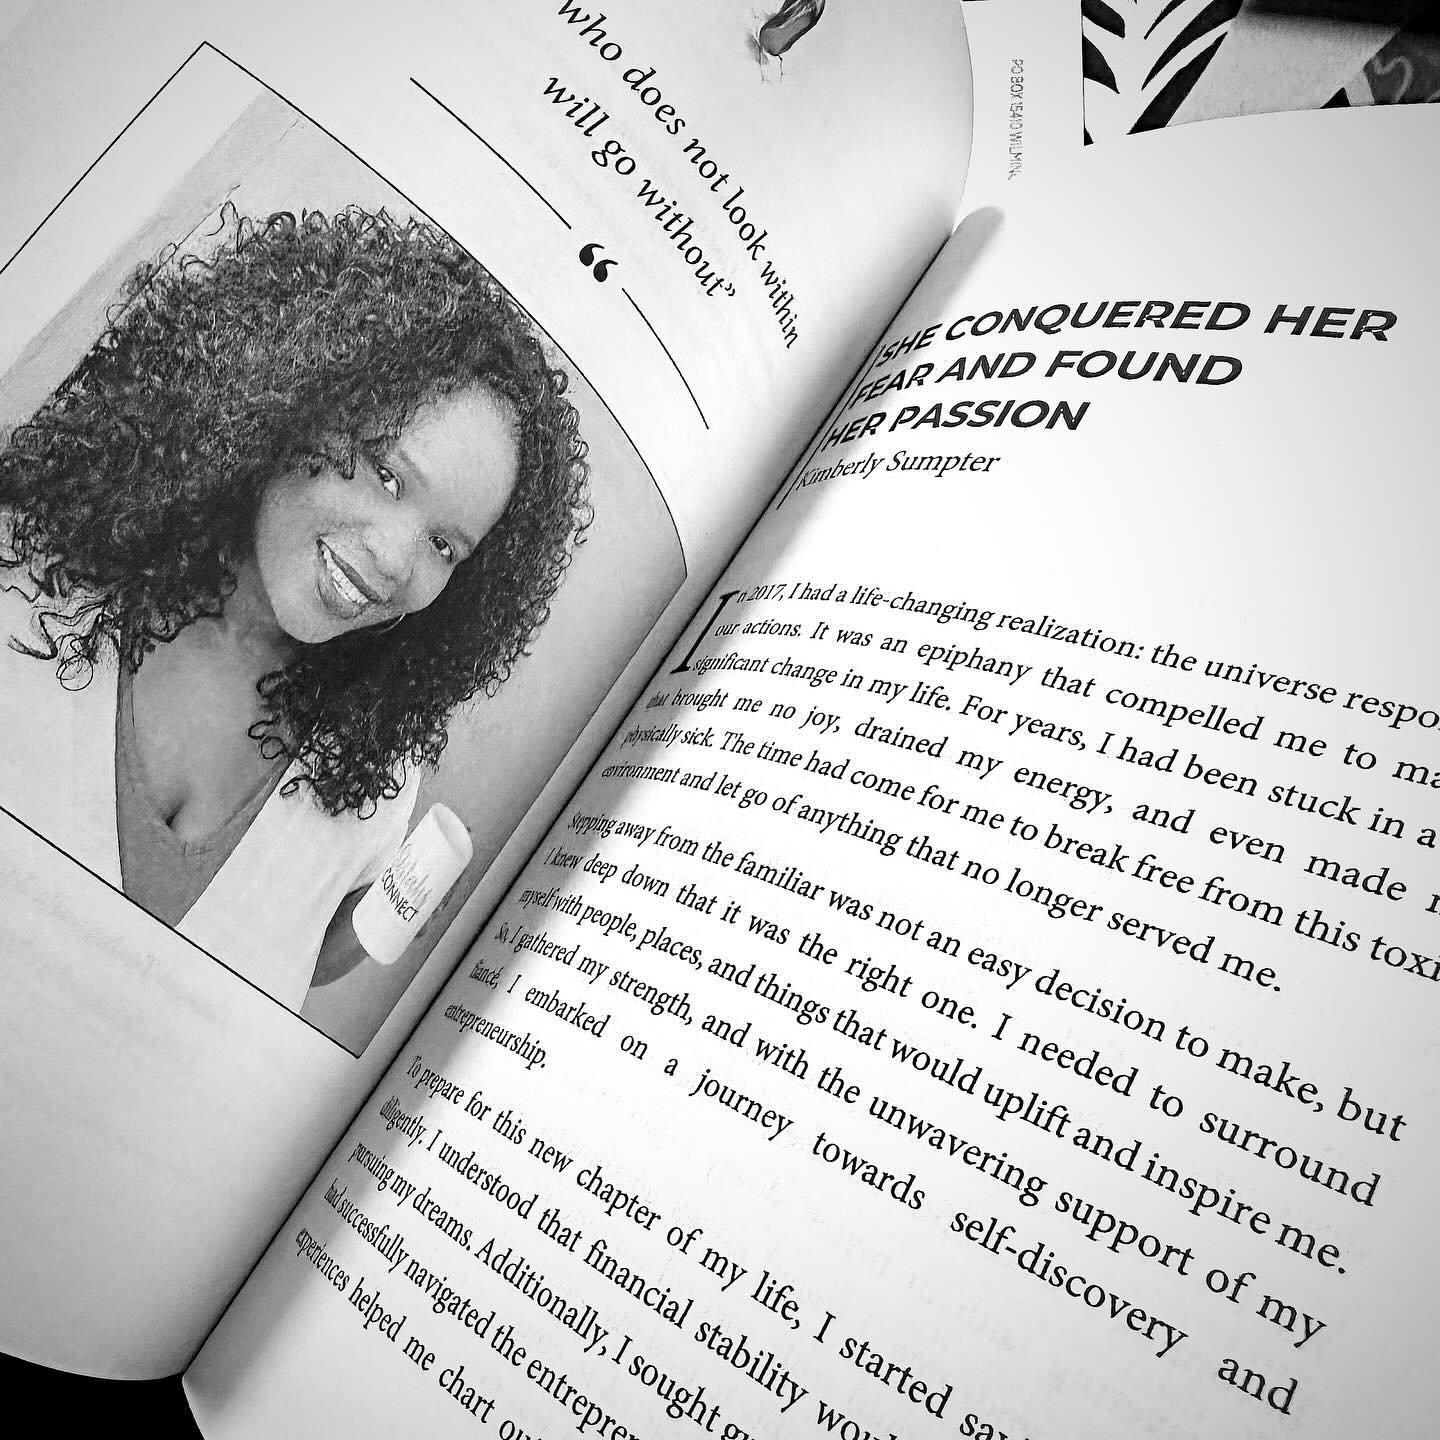 &quot;🎙️ My journey as a podcaster has opened up so many opportunities. Look at what I got in the mail today... I'm thrilled to announce that I'm a contributing author, sharing my journey alongside other black women entrepreneurs in 'Women Crushing 